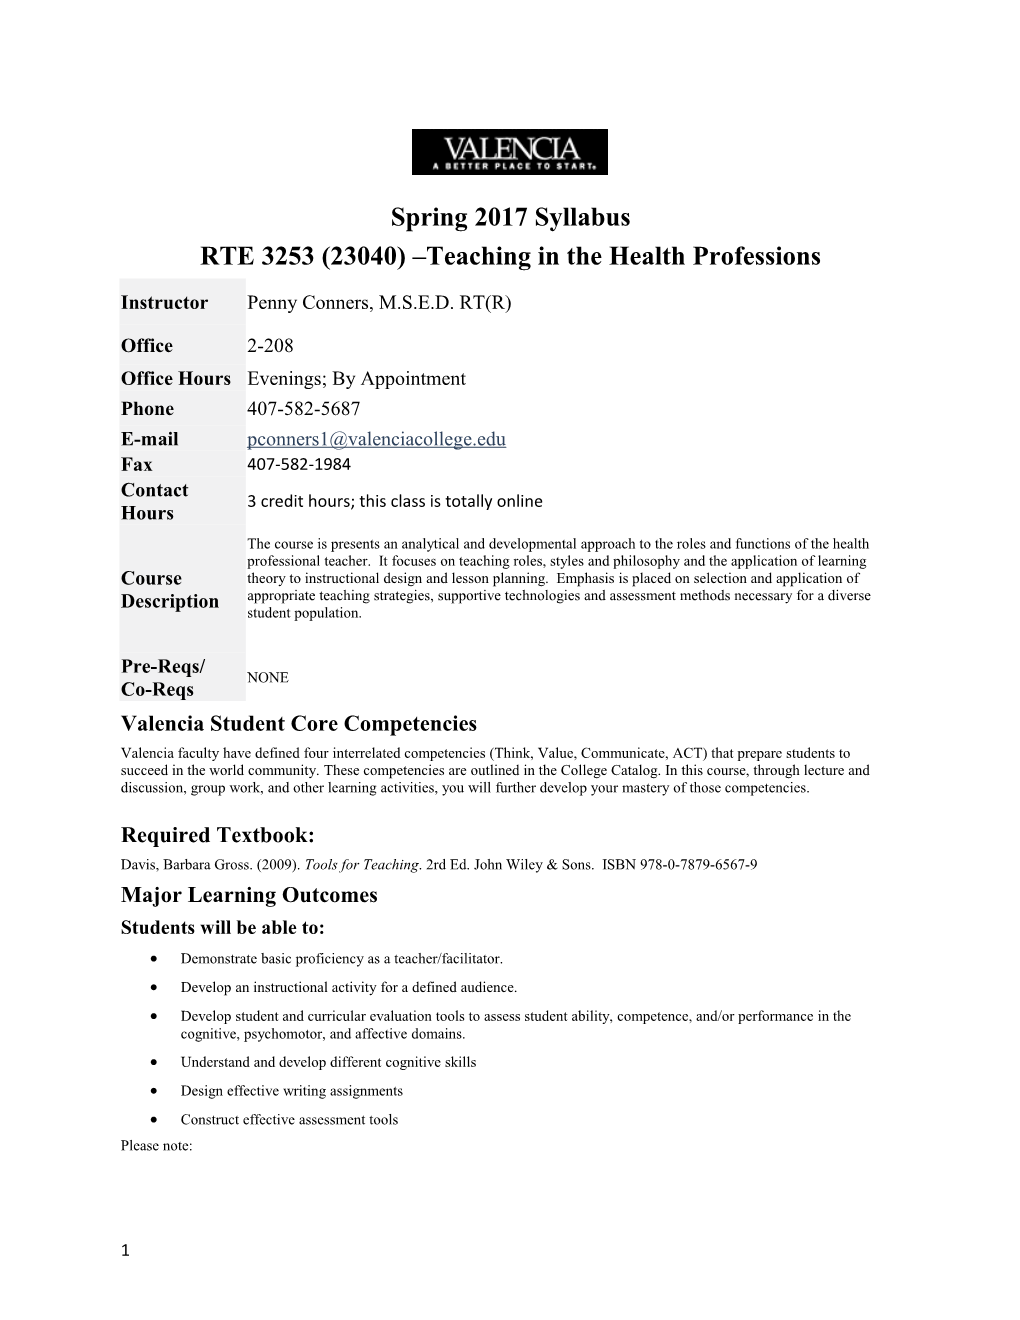 RTE 3253 (23040) Teaching in the Health Professions